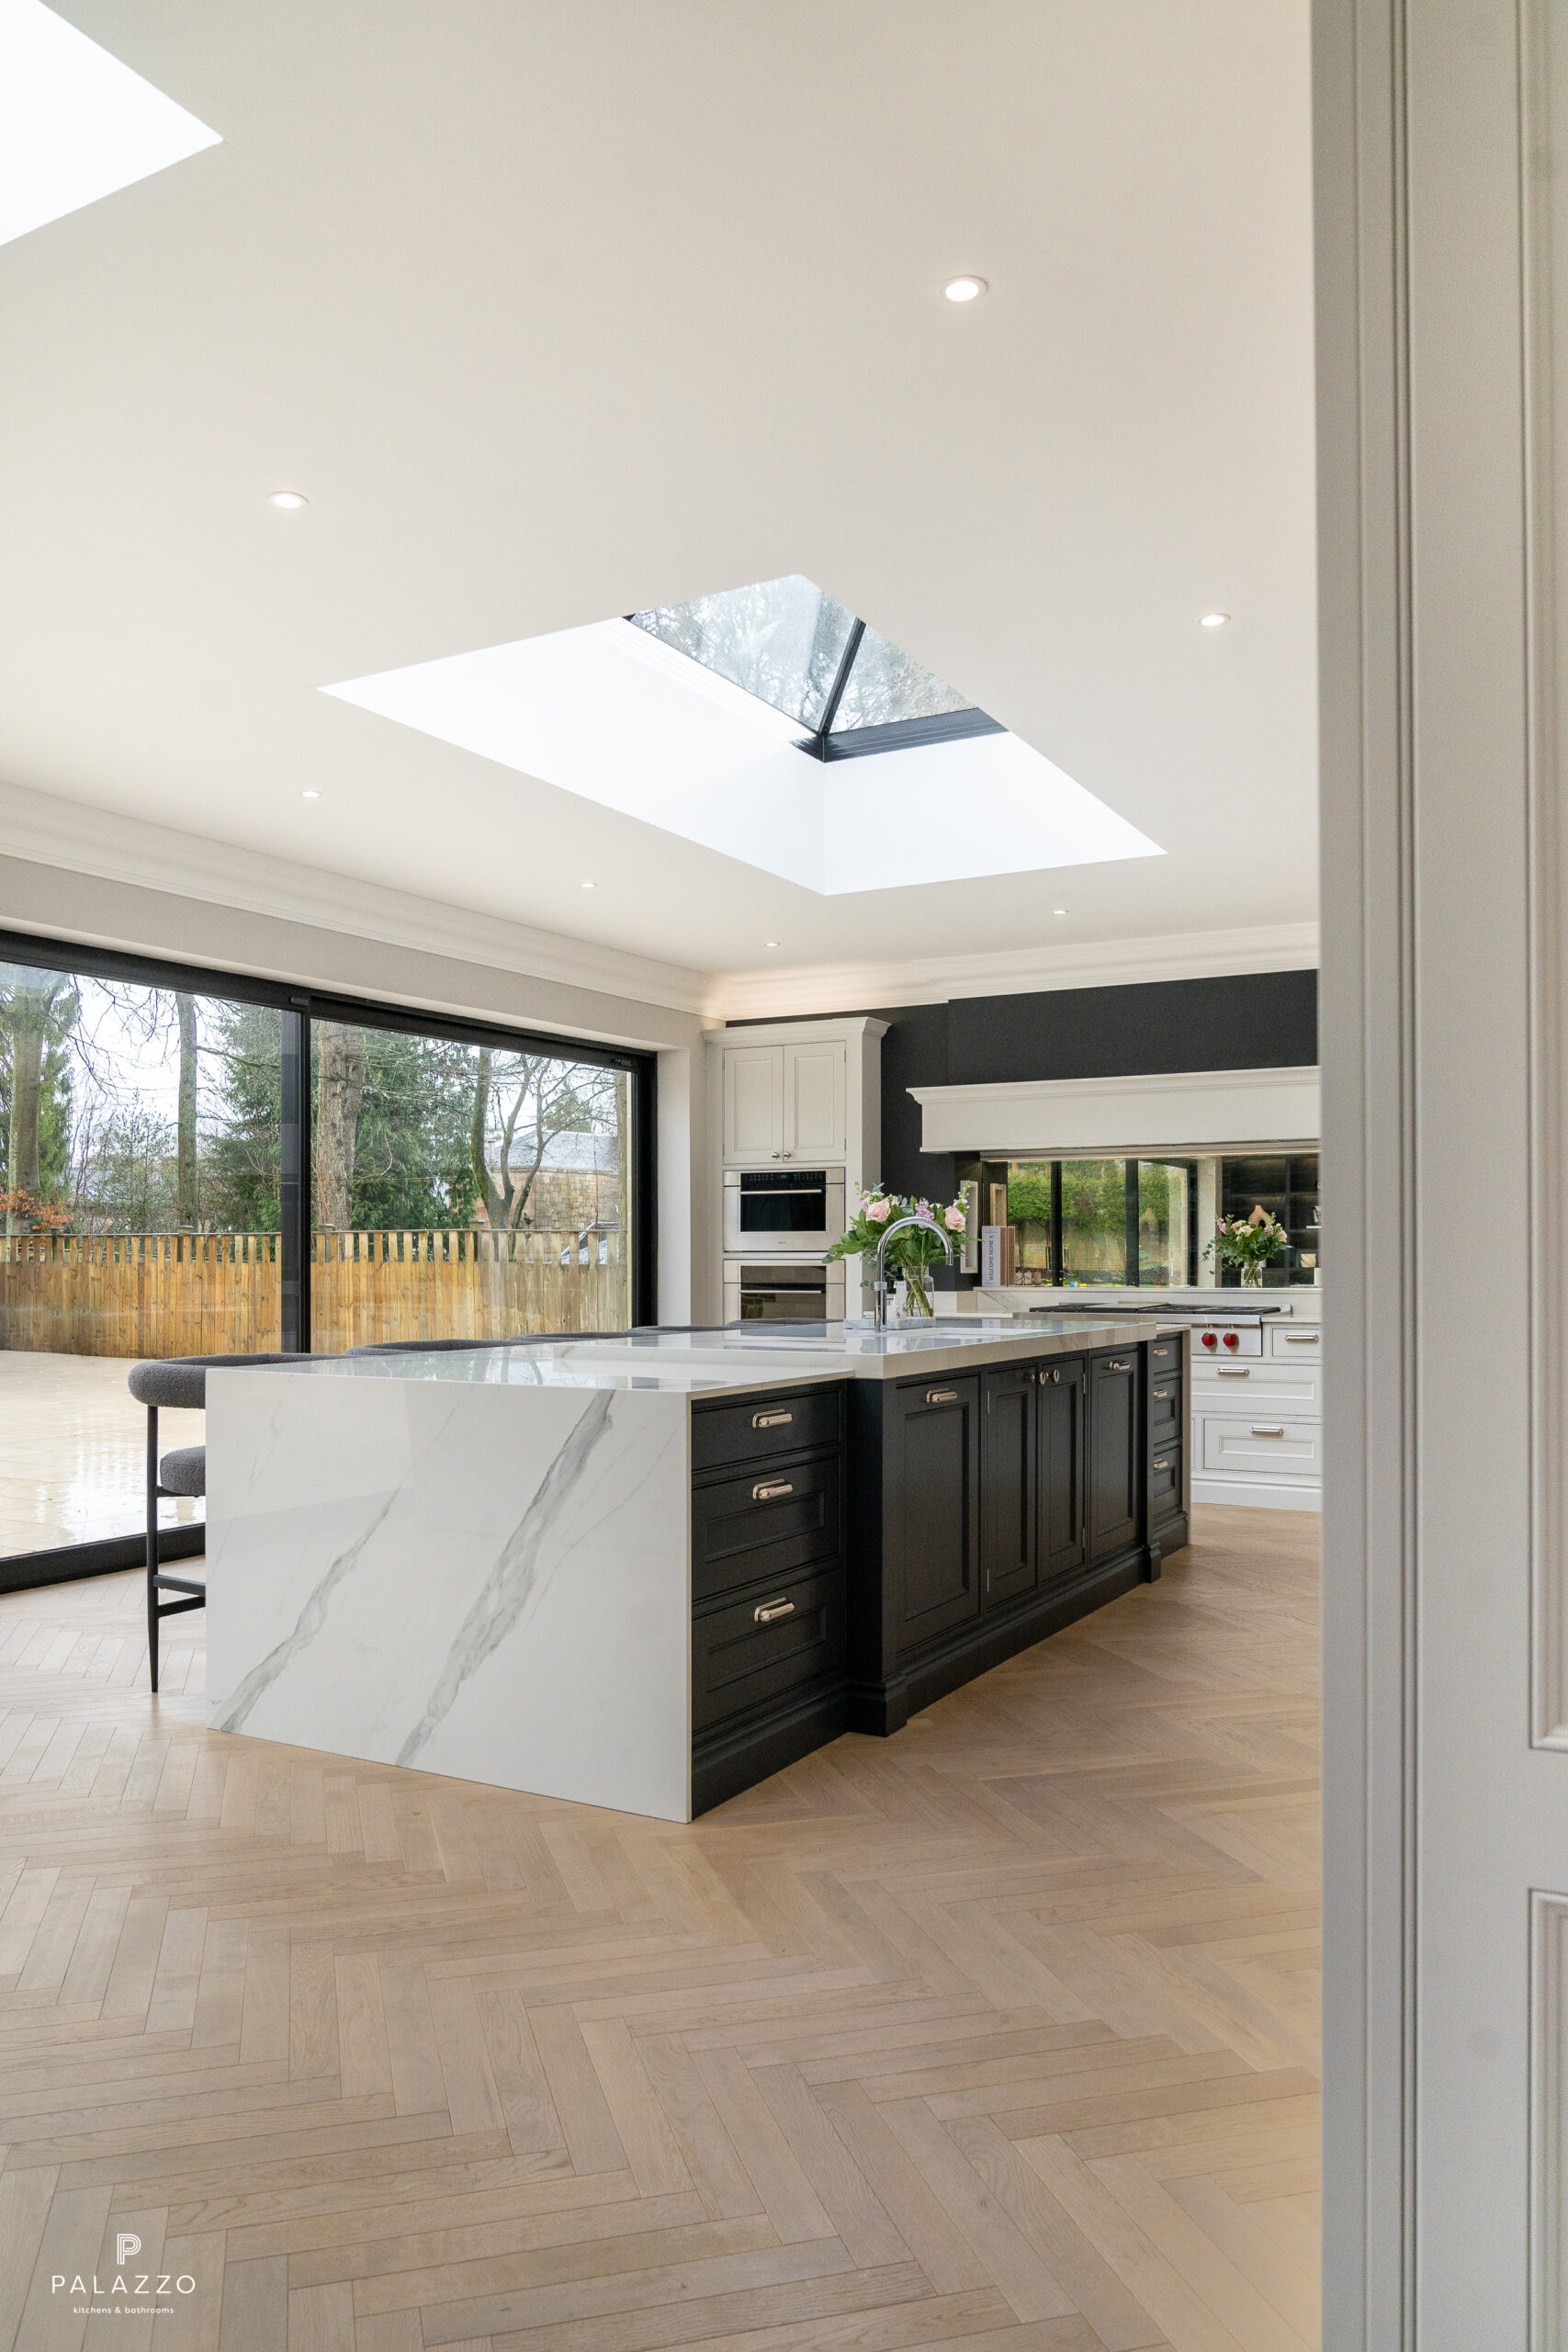 Image 3: An In-Frame Kitchen In A New Home Extension In Glasgow